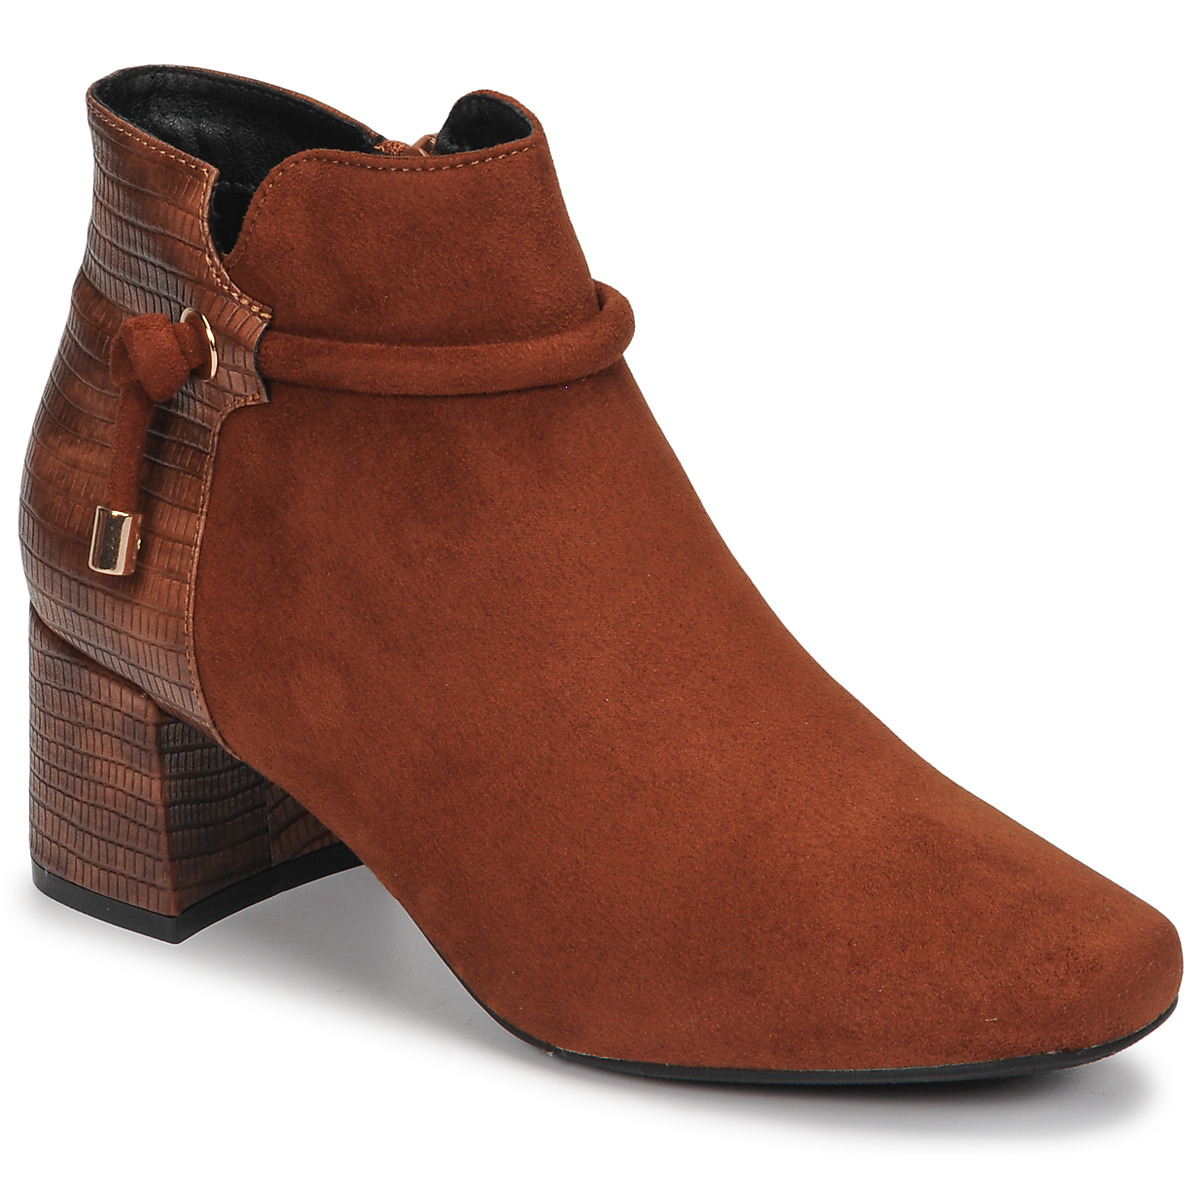 Lady Brown Ankle Boots Spartoo - Moony Mood GOOFASH